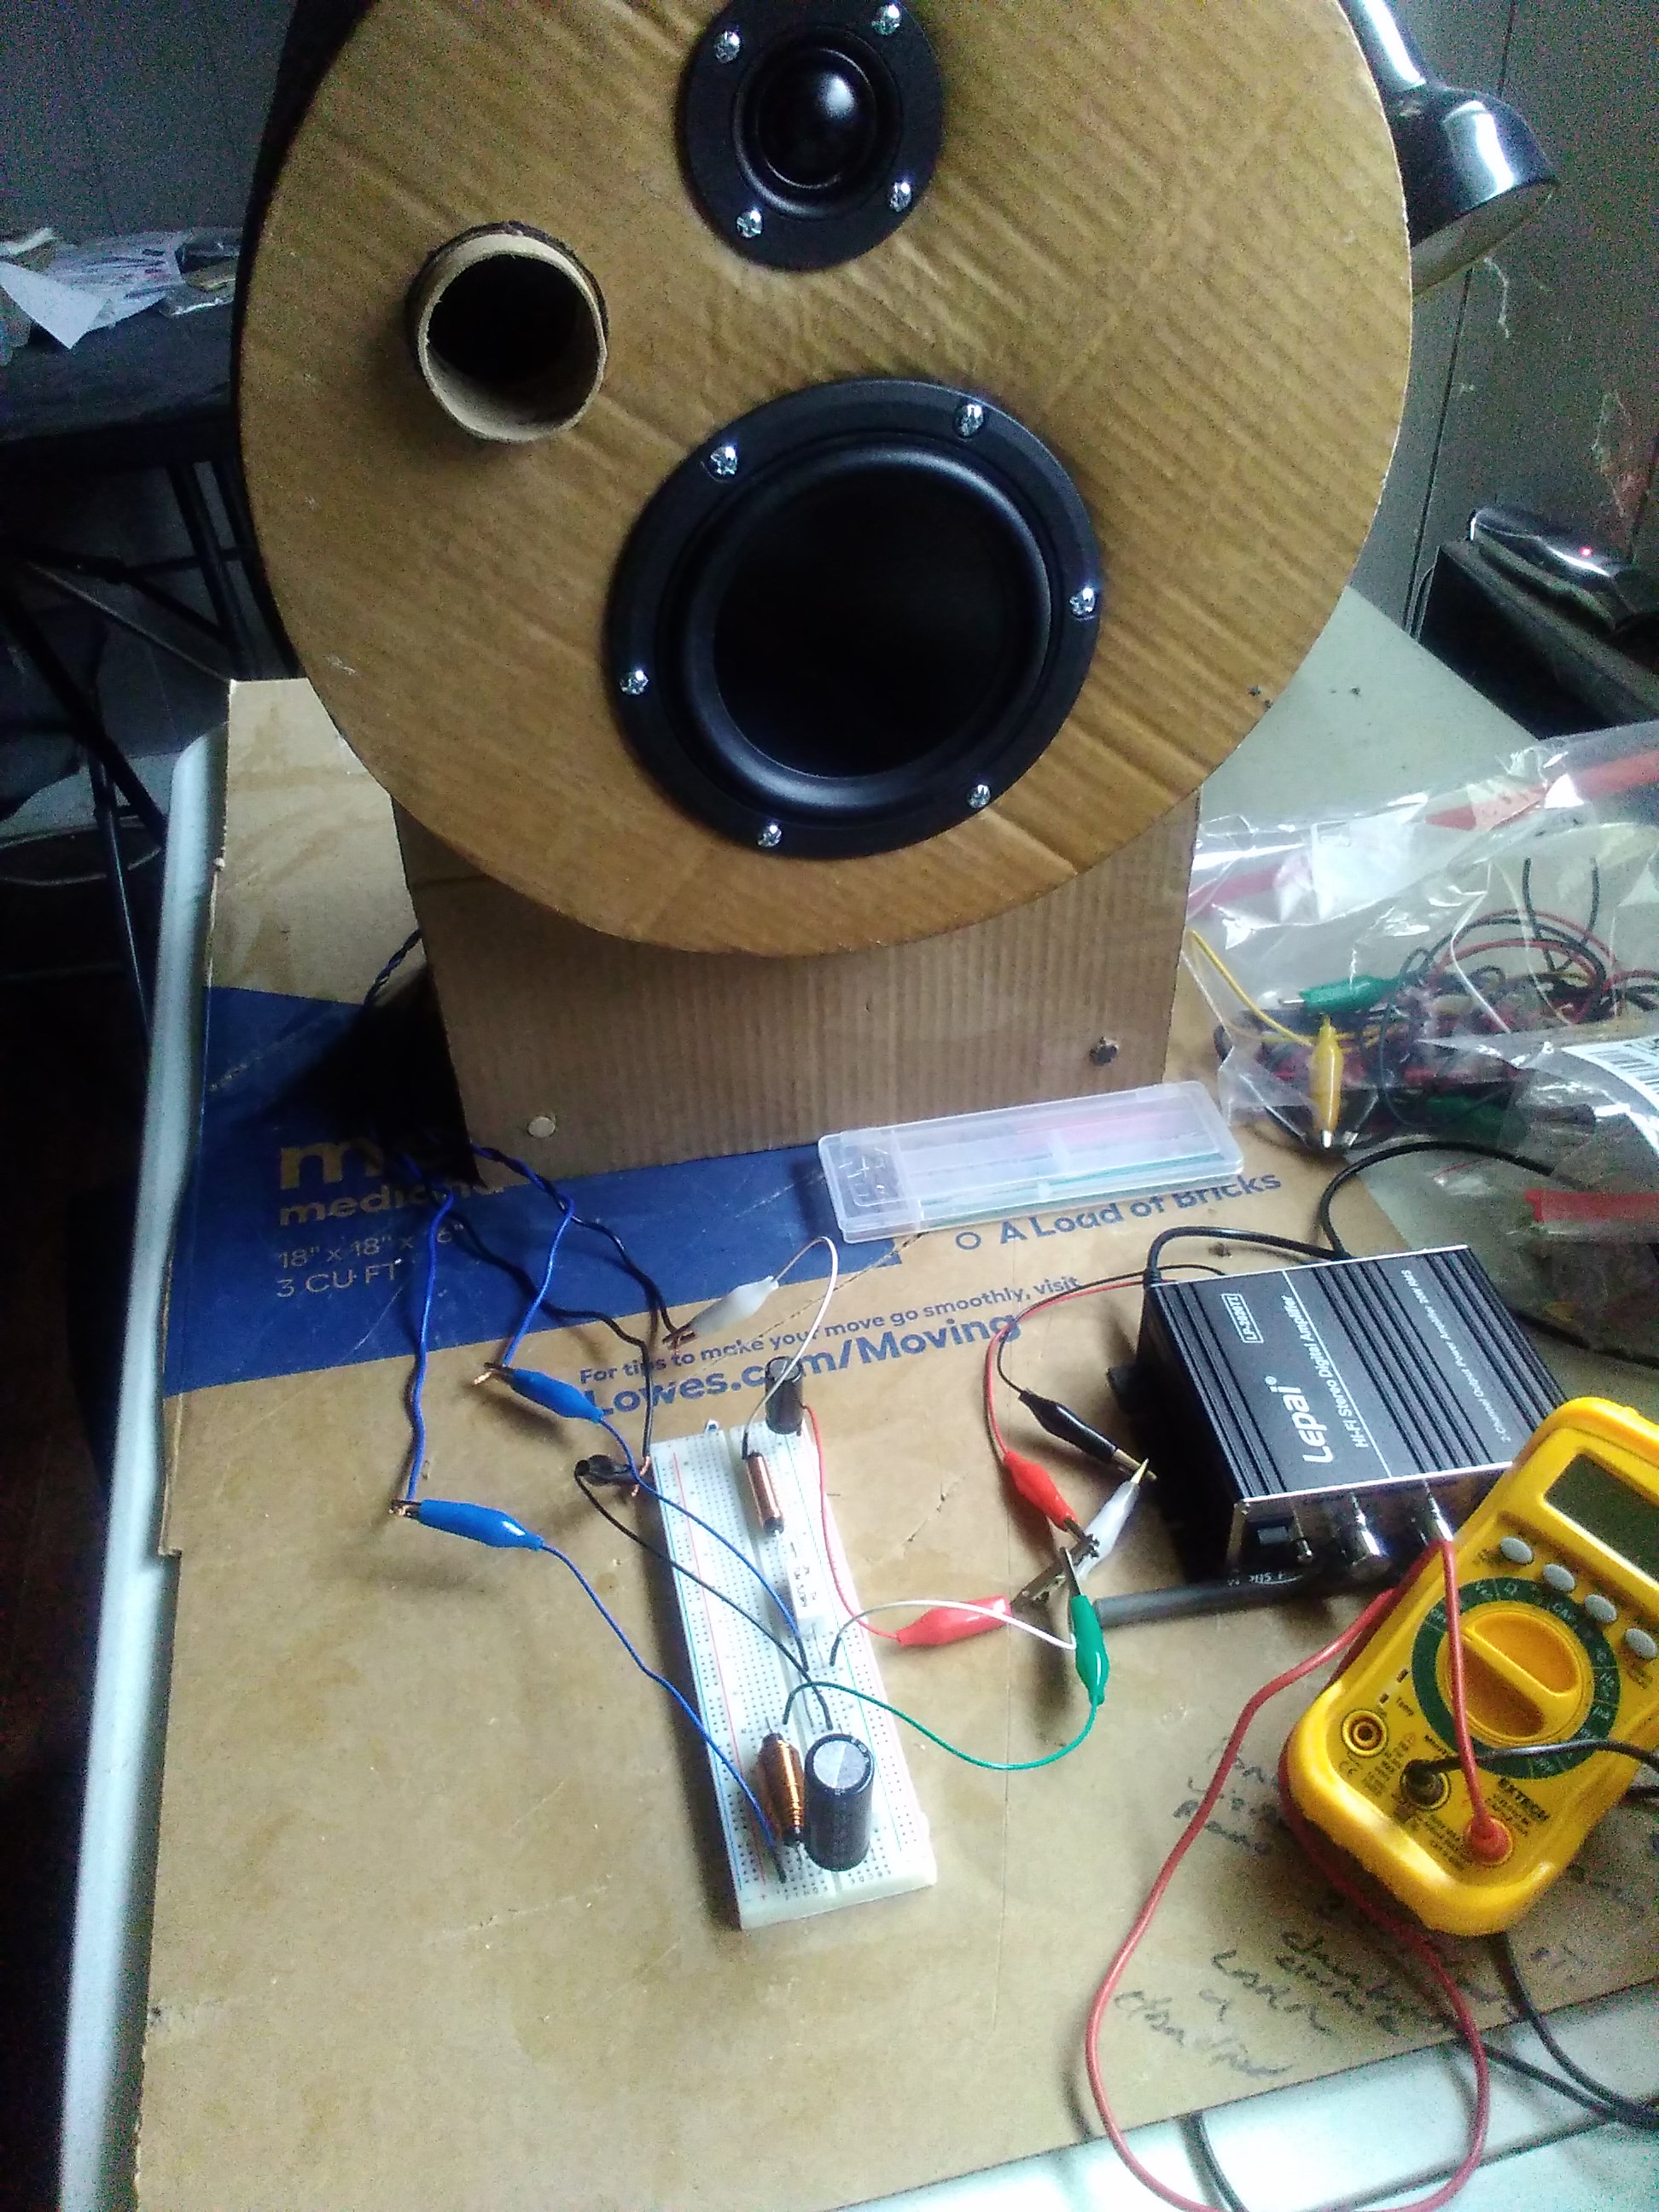 Check out my loudspeaker test rig!!!